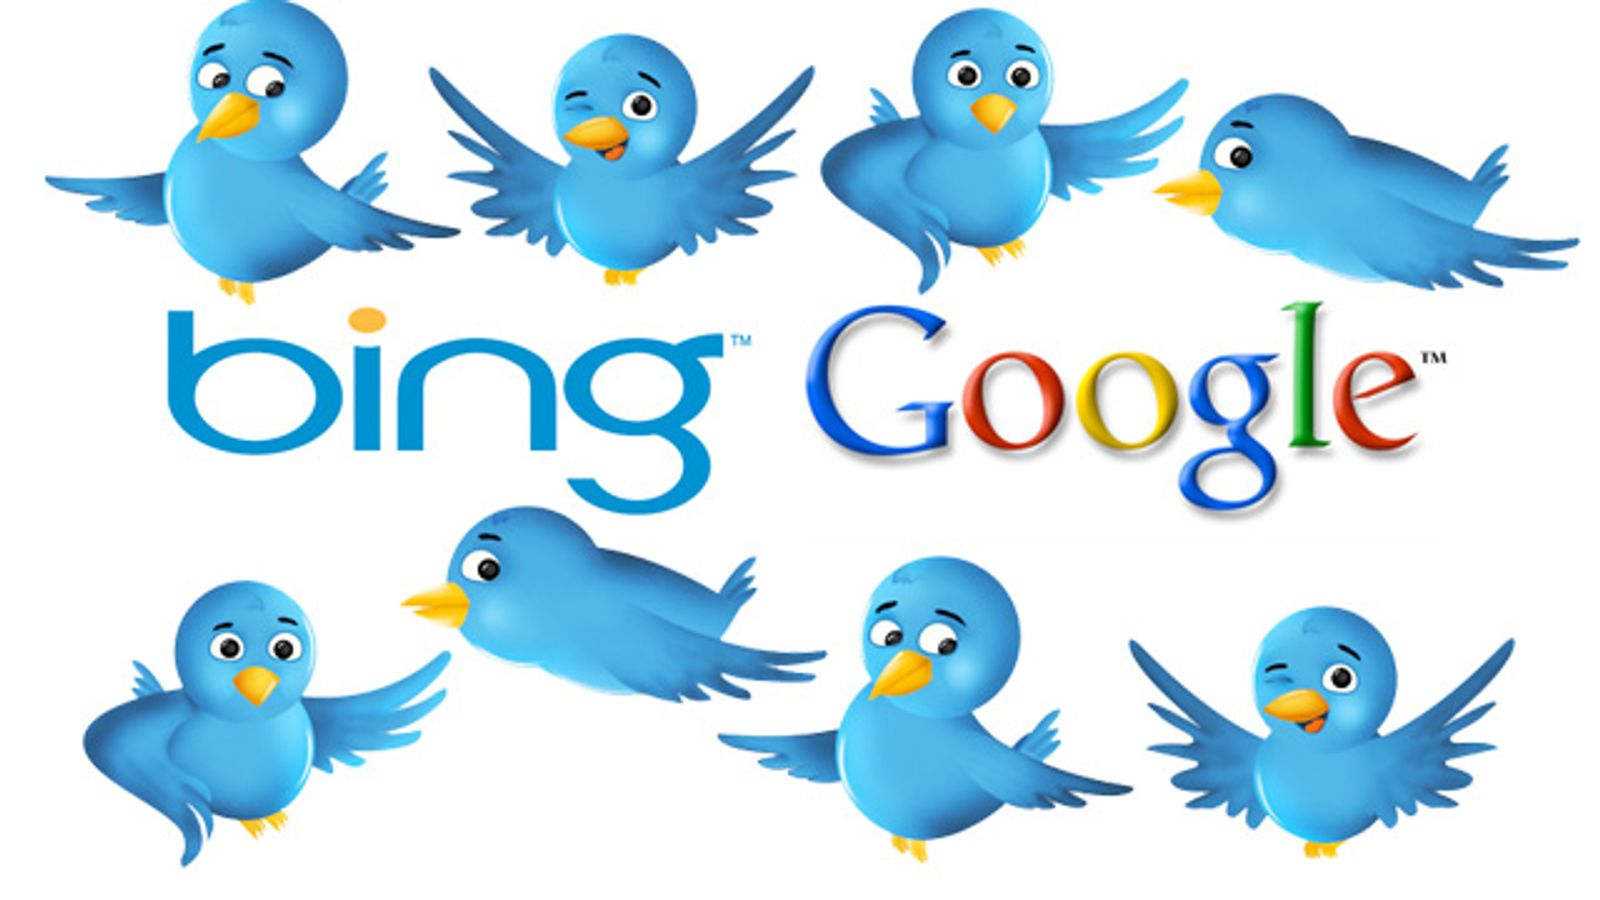 Bing, Google Add Twitter to Search; Bing Adds FaceBook, Too